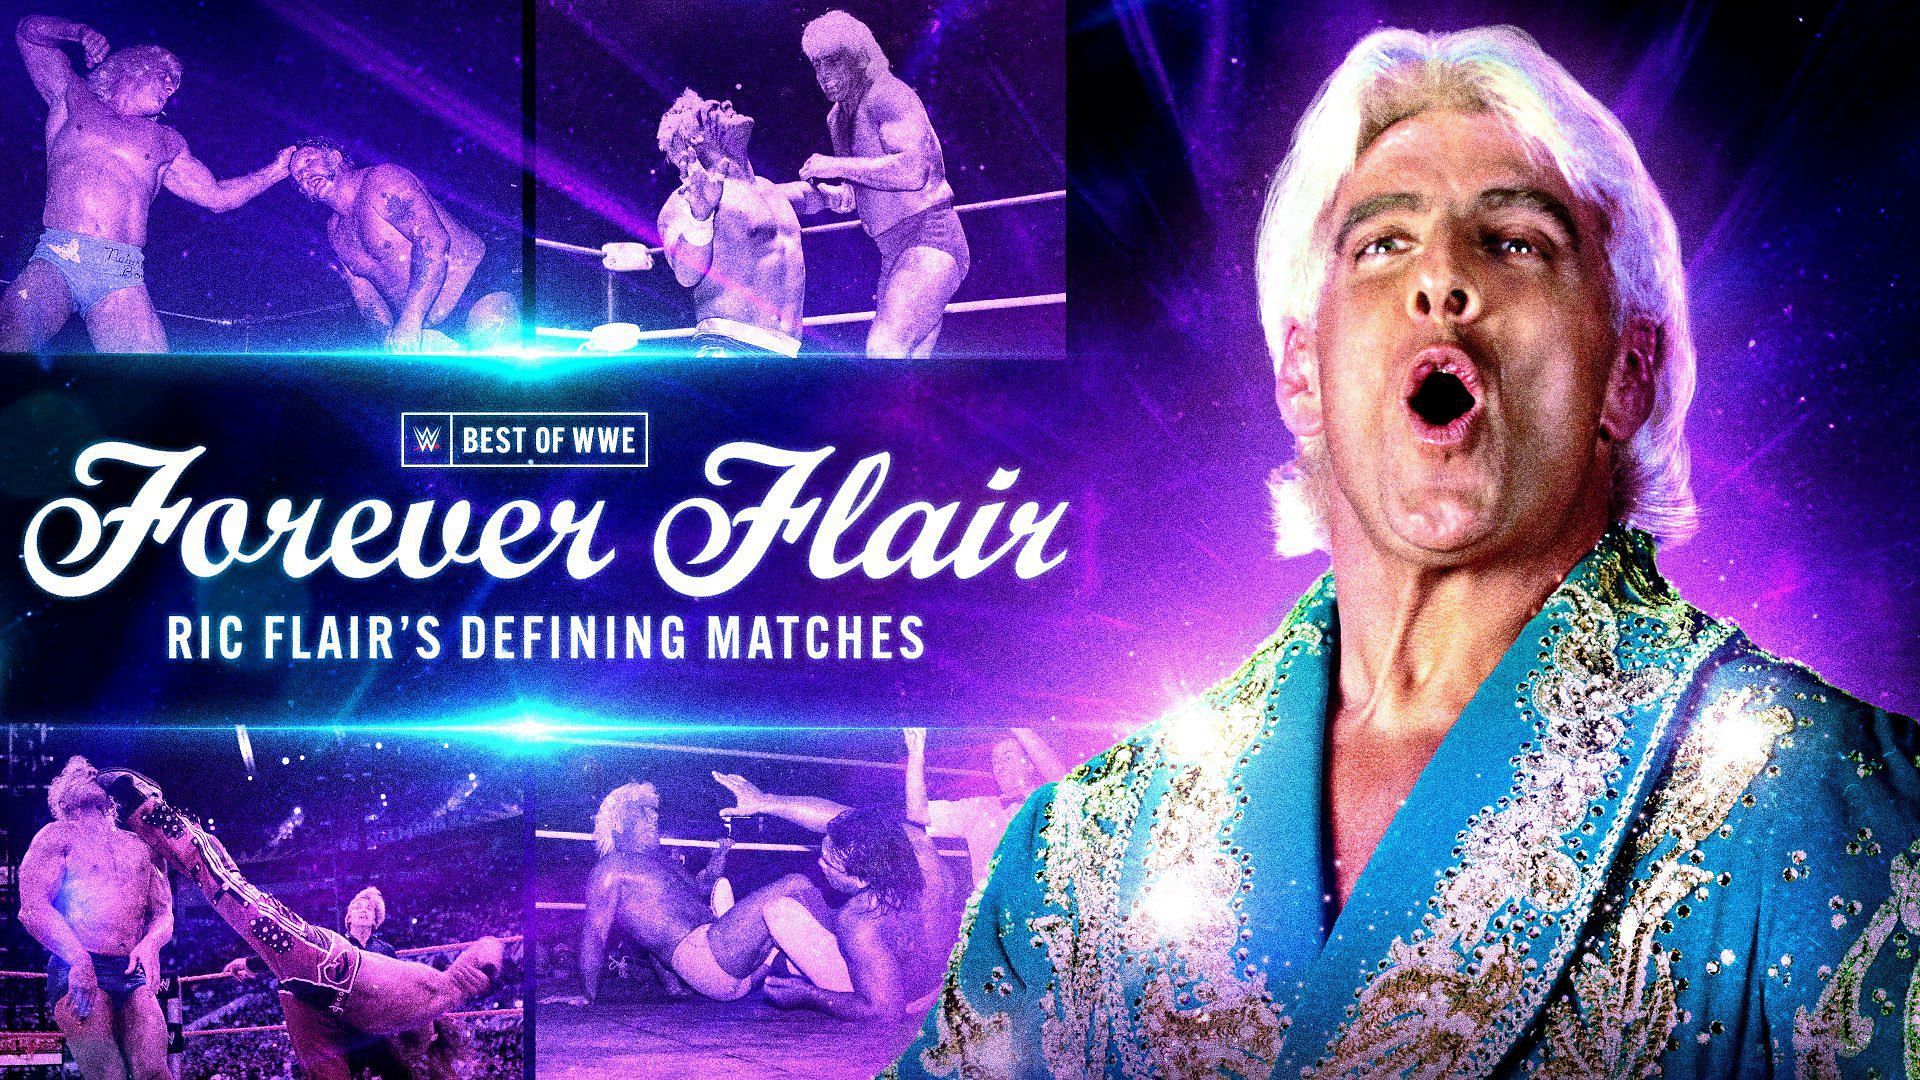 The Best of WWE: Forever Flair logo